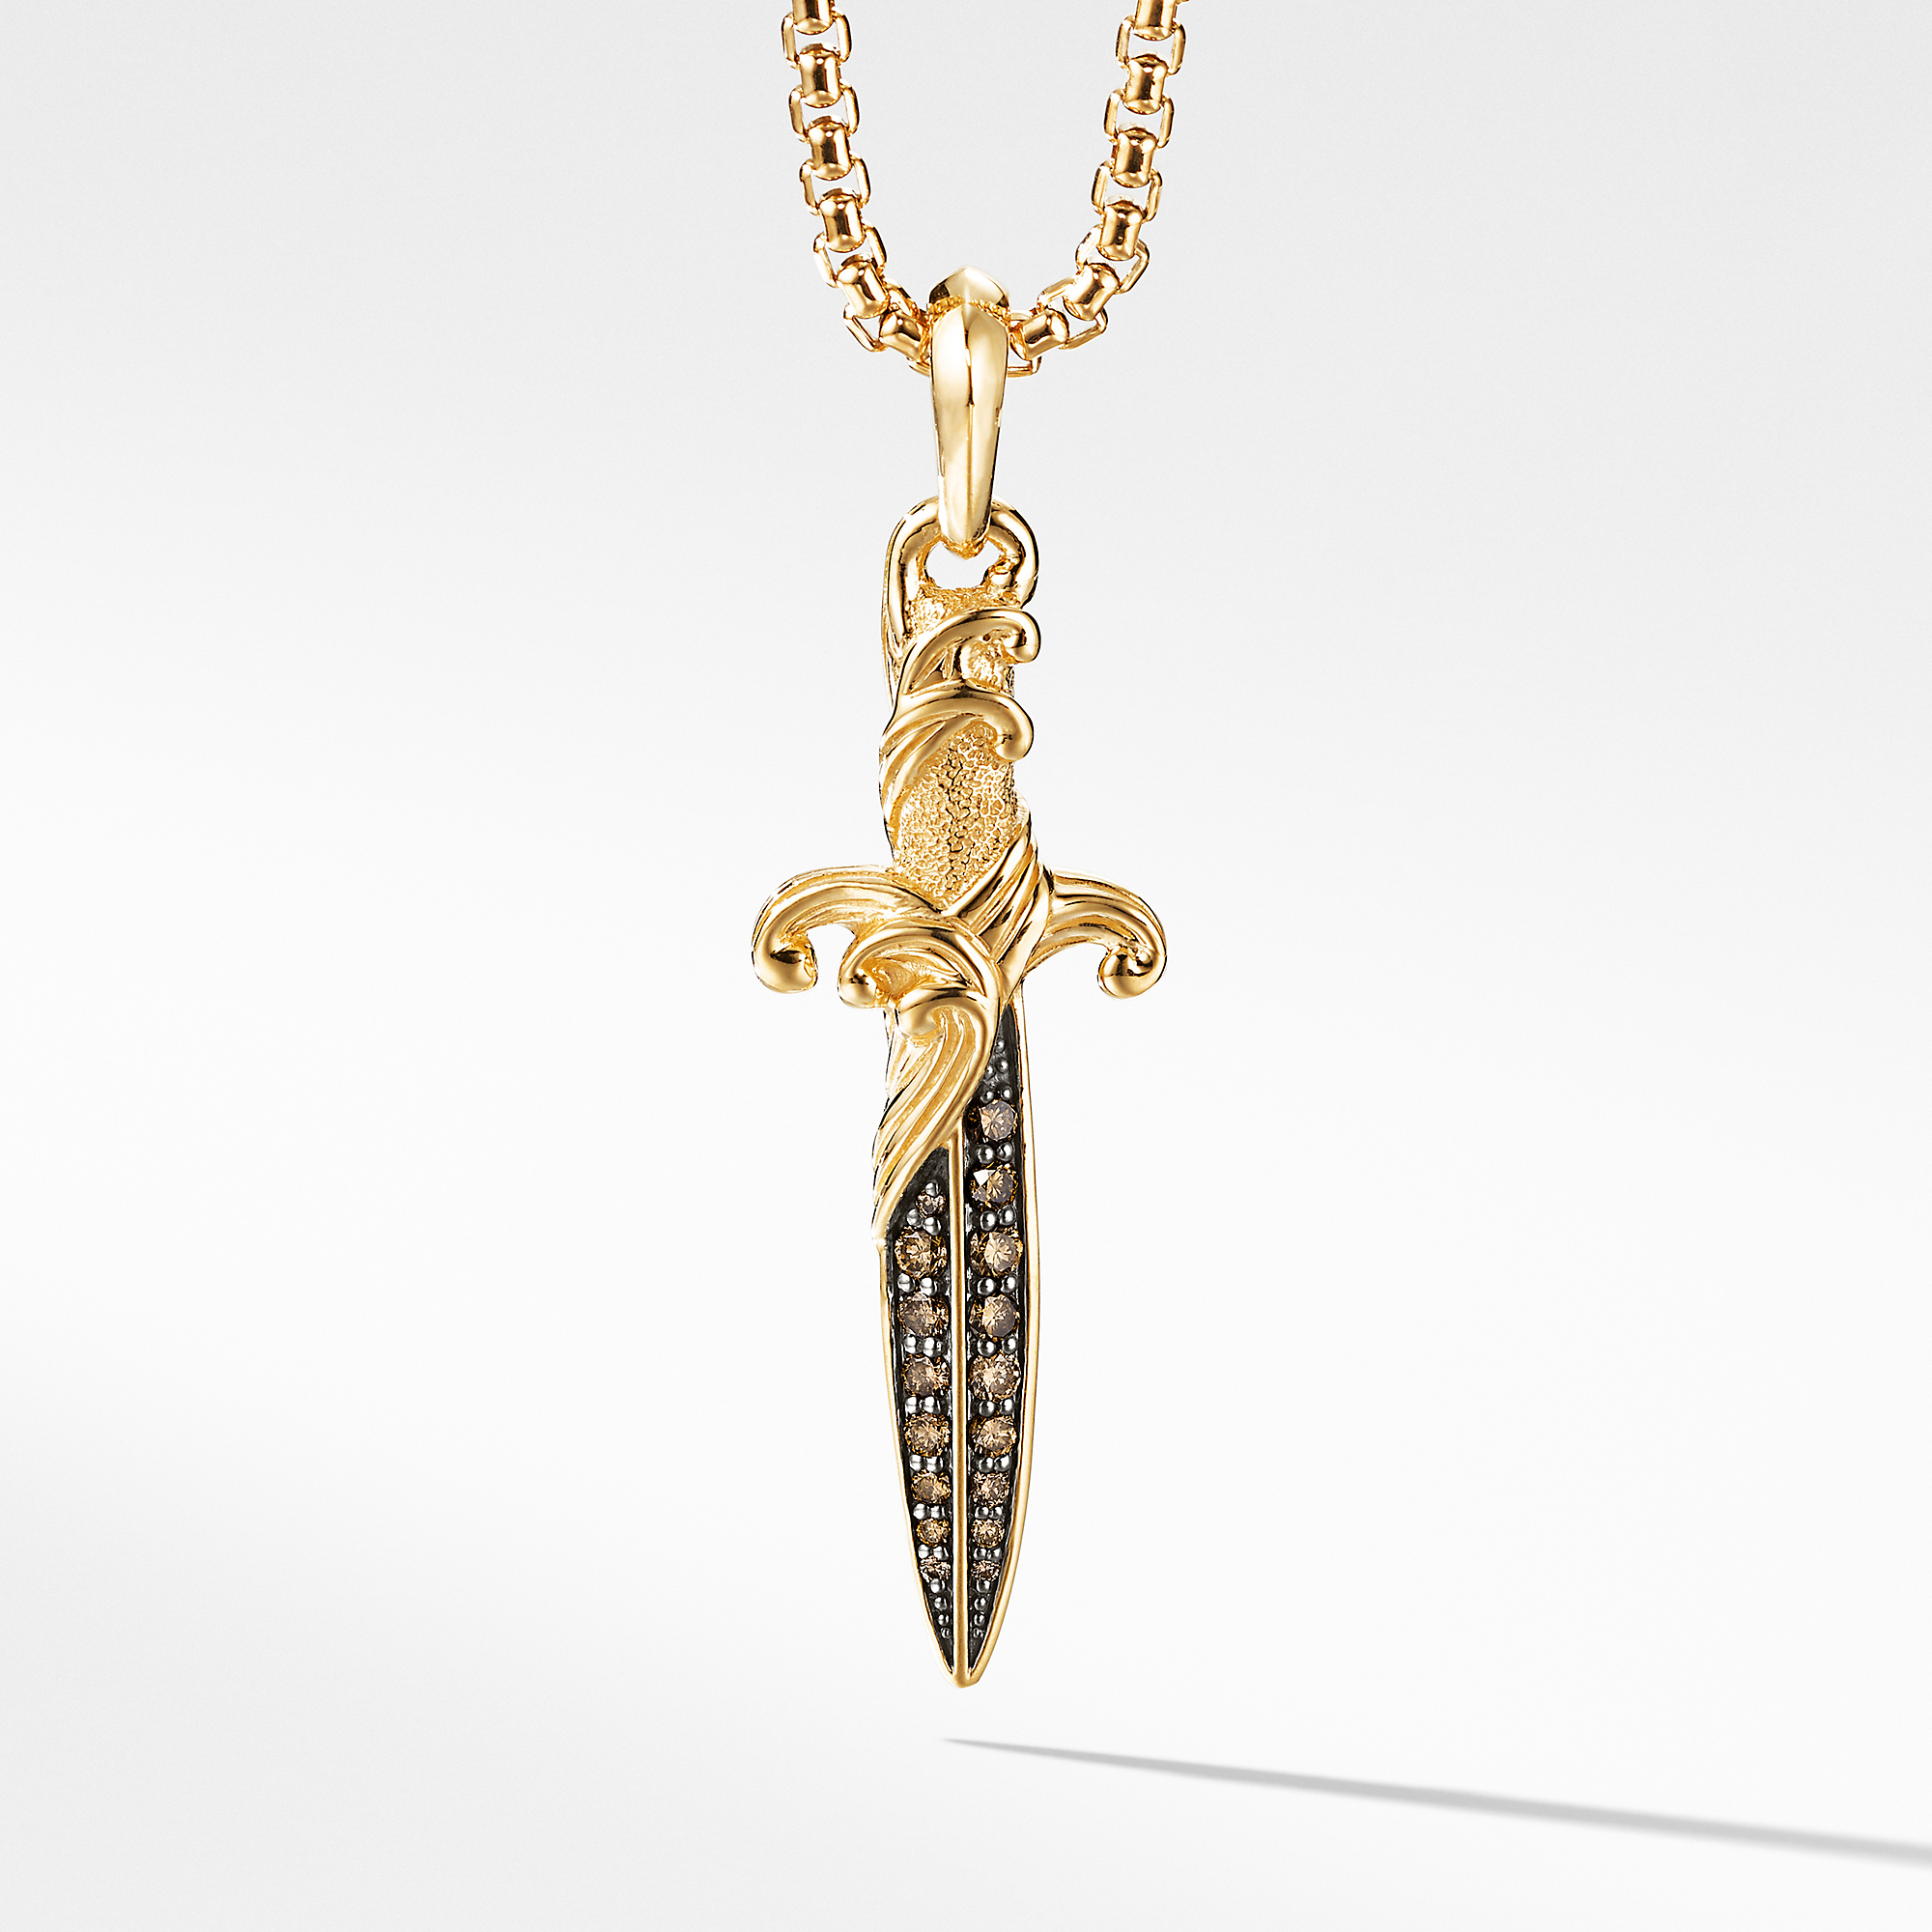 A sword-like design with a yellow gold coat hanging